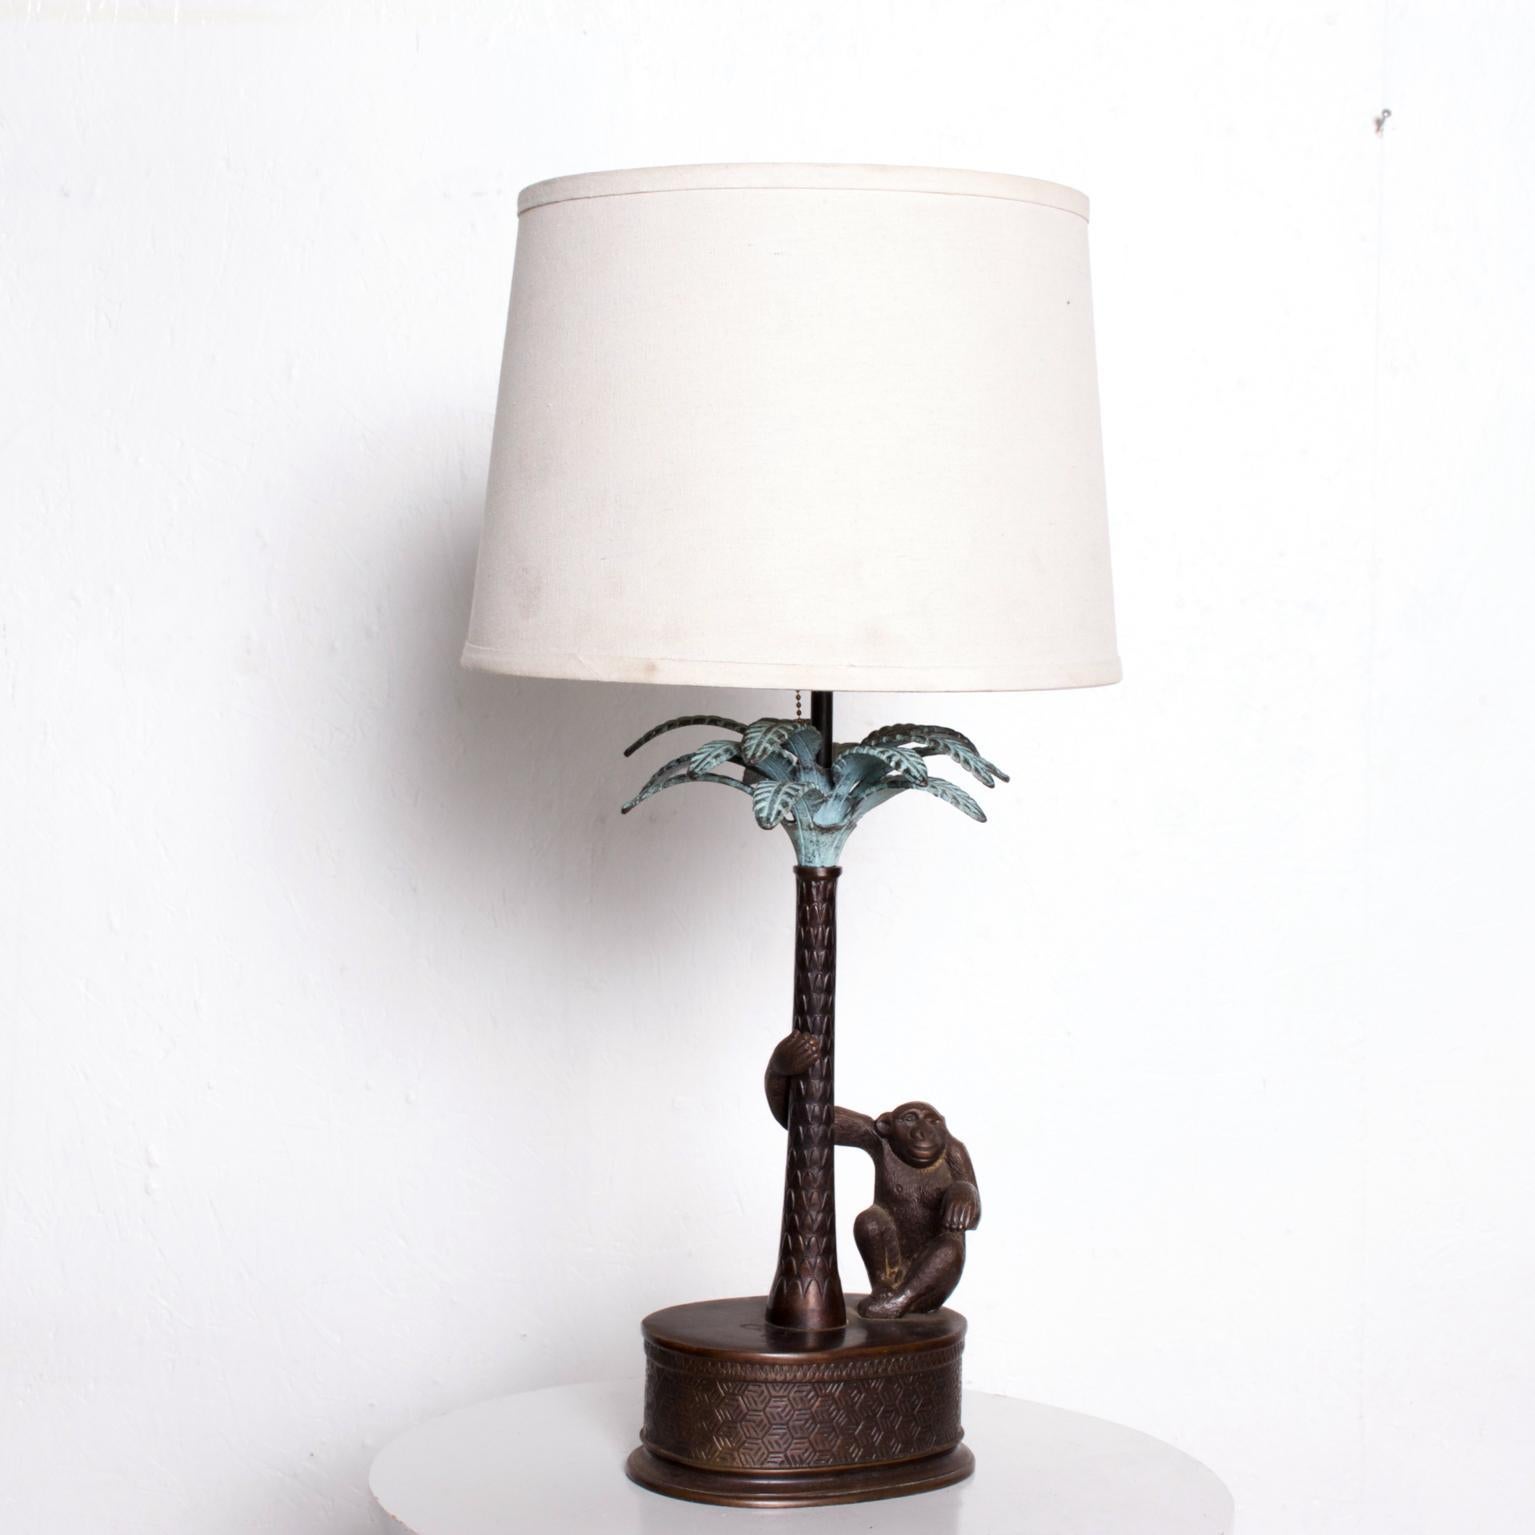 For your pleasure: Magnificent Whimsy Monkey and Palm Tree table lamp
Hollywood Regency Palm Tree with Monkey in bronze by Maitland Smith Philippines 1970s
Dimensions: 22 H x 8 W x 8 D
Original unrestored vintage condition. No lamp shade is